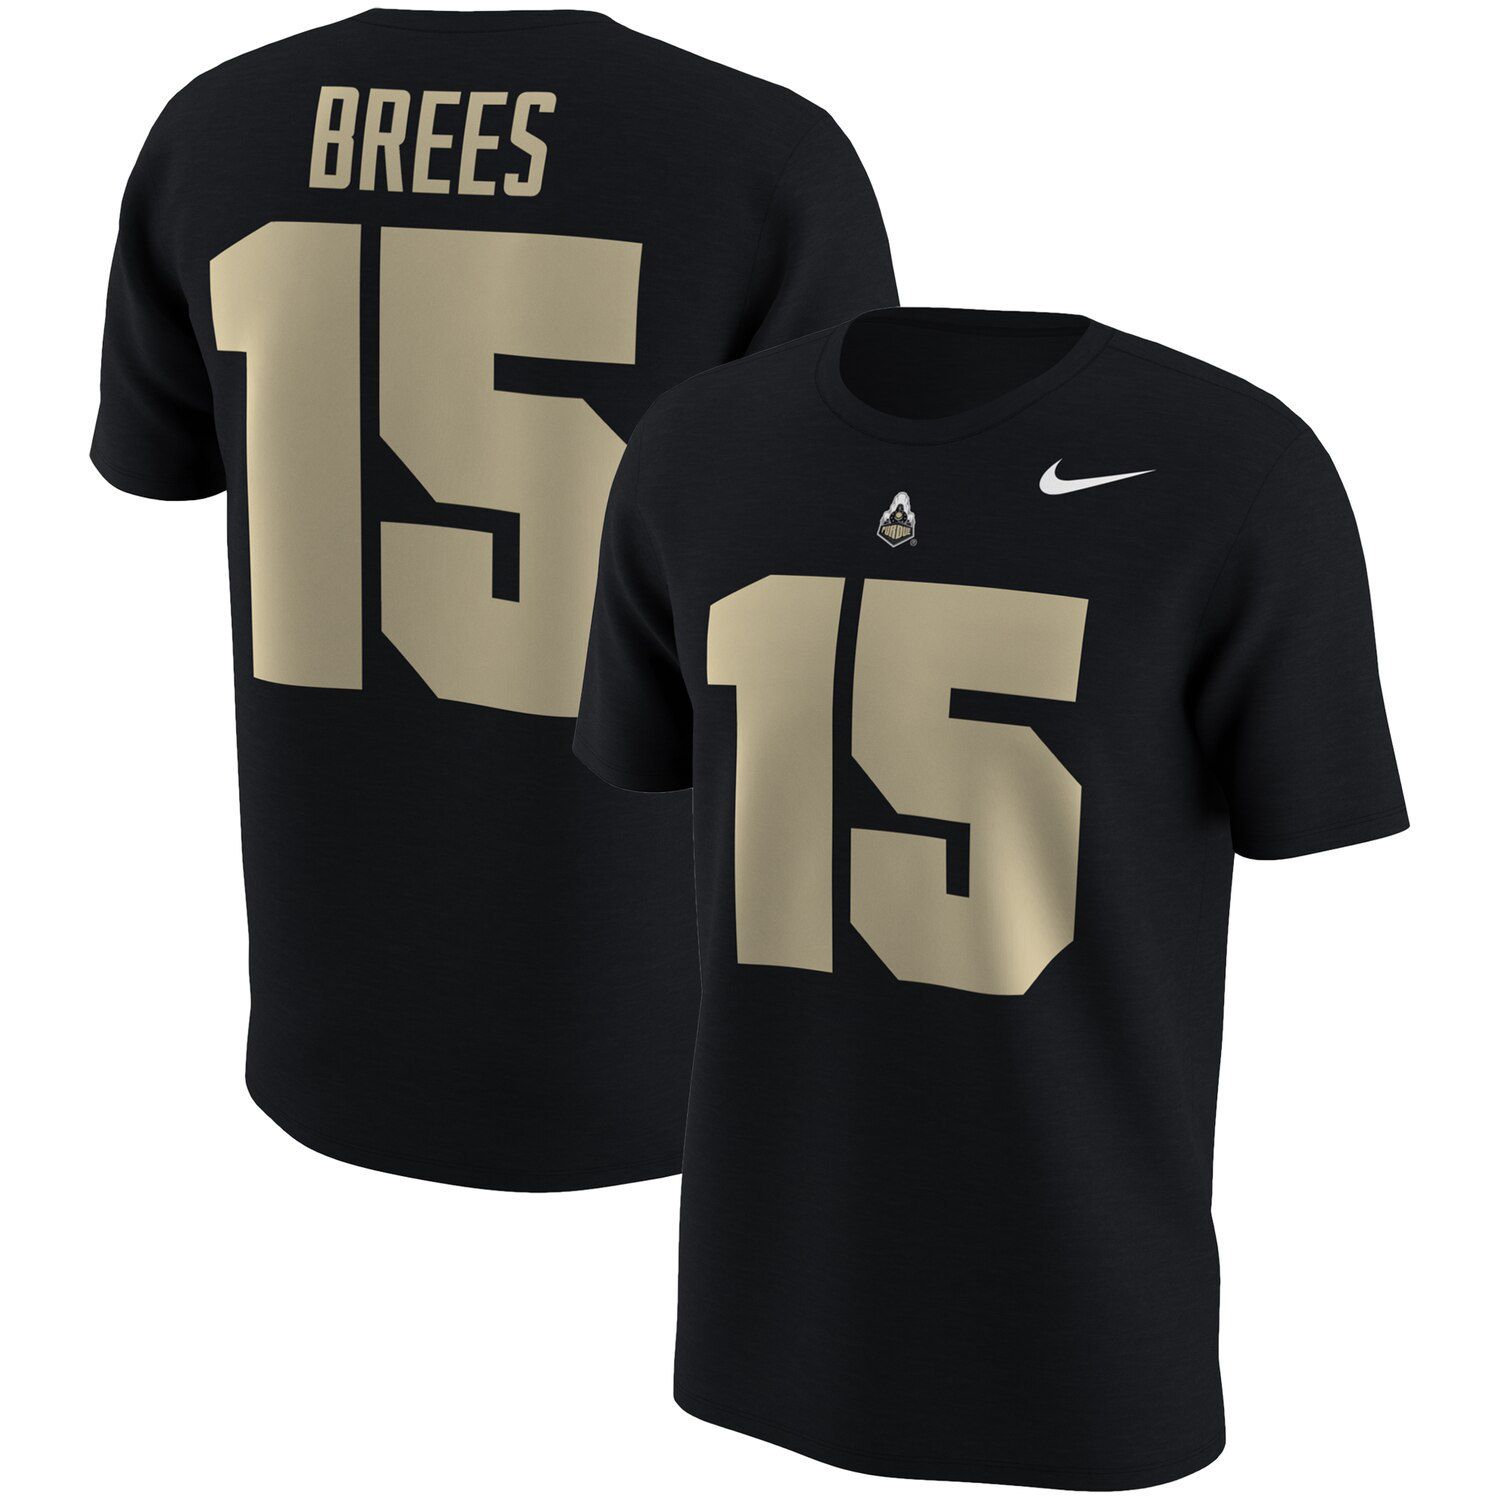 drew brees college jersey number